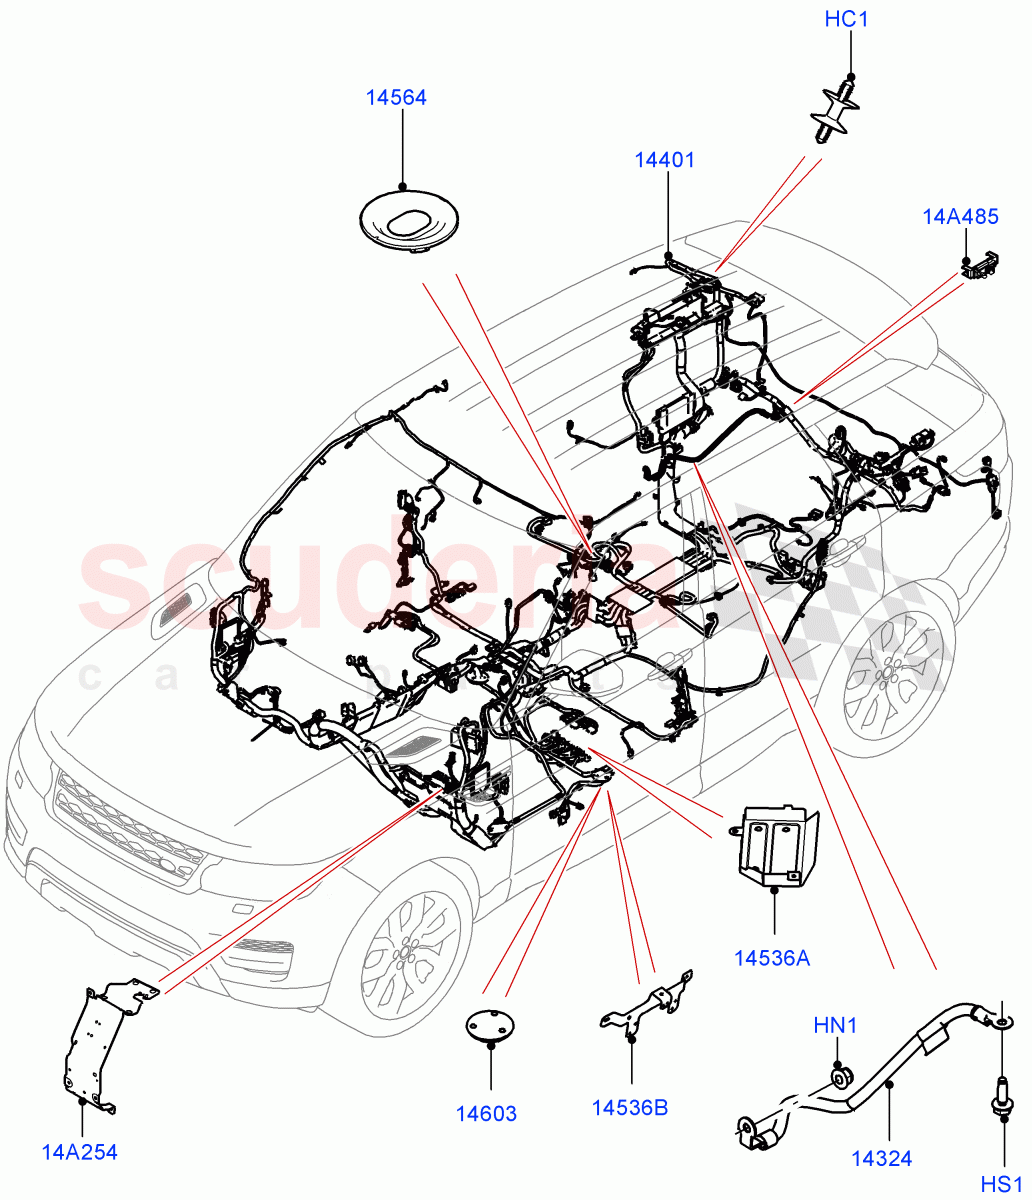 Electrical Wiring - Engine And Dash(Main Harness)((V)FROMFA000001,(V)TOFA999999) of Land Rover Land Rover Range Rover Sport (2014+) [3.0 DOHC GDI SC V6 Petrol]